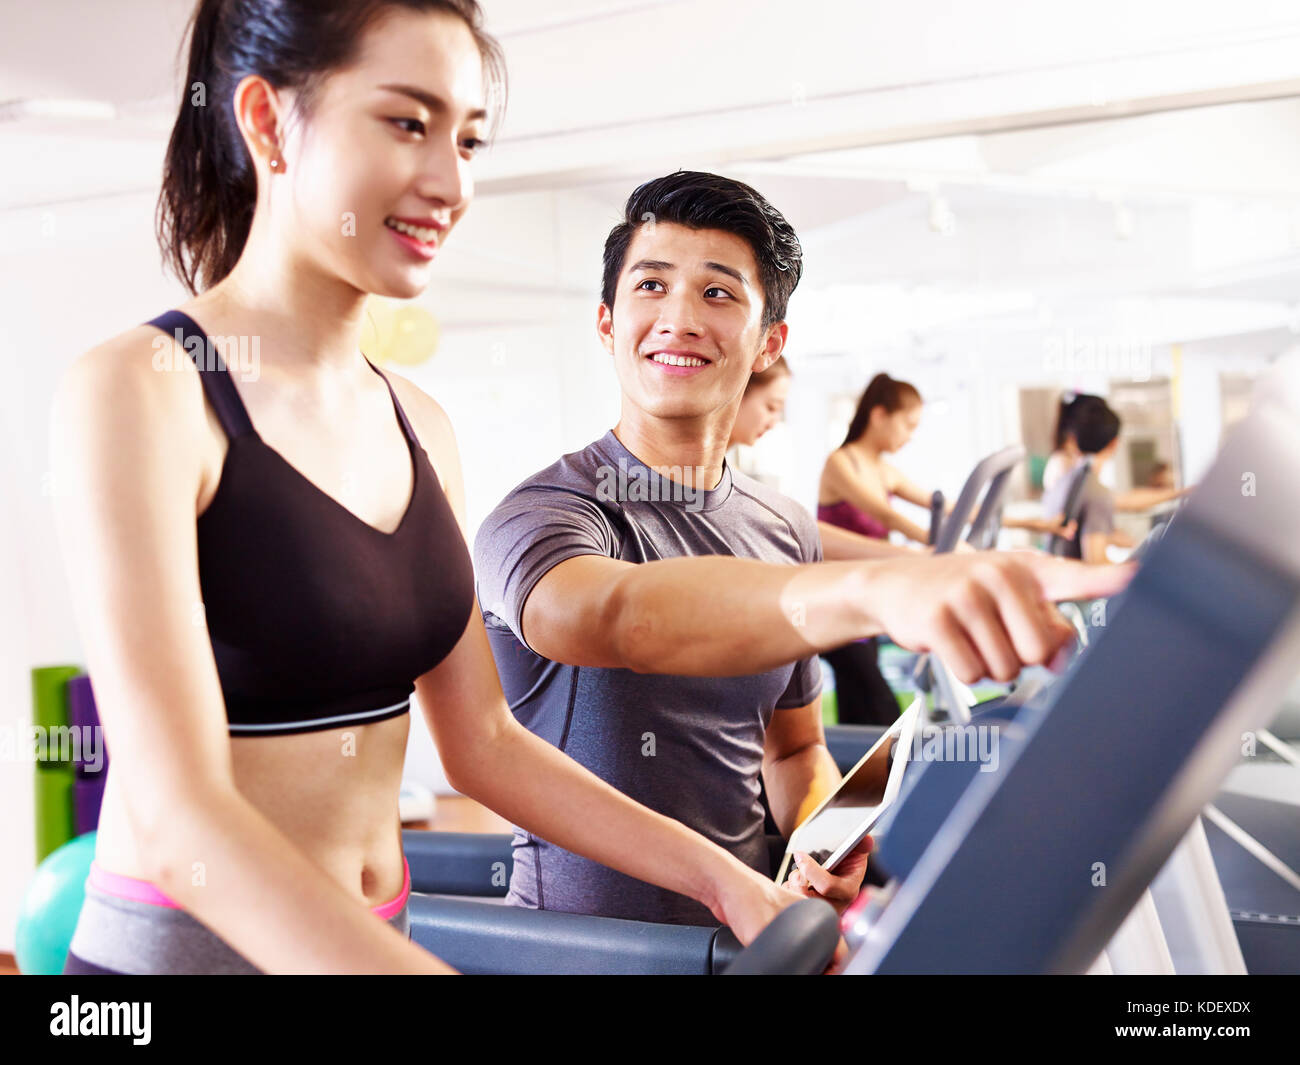 young asian woman running on treadmill coached by young trainer. Stock Photo